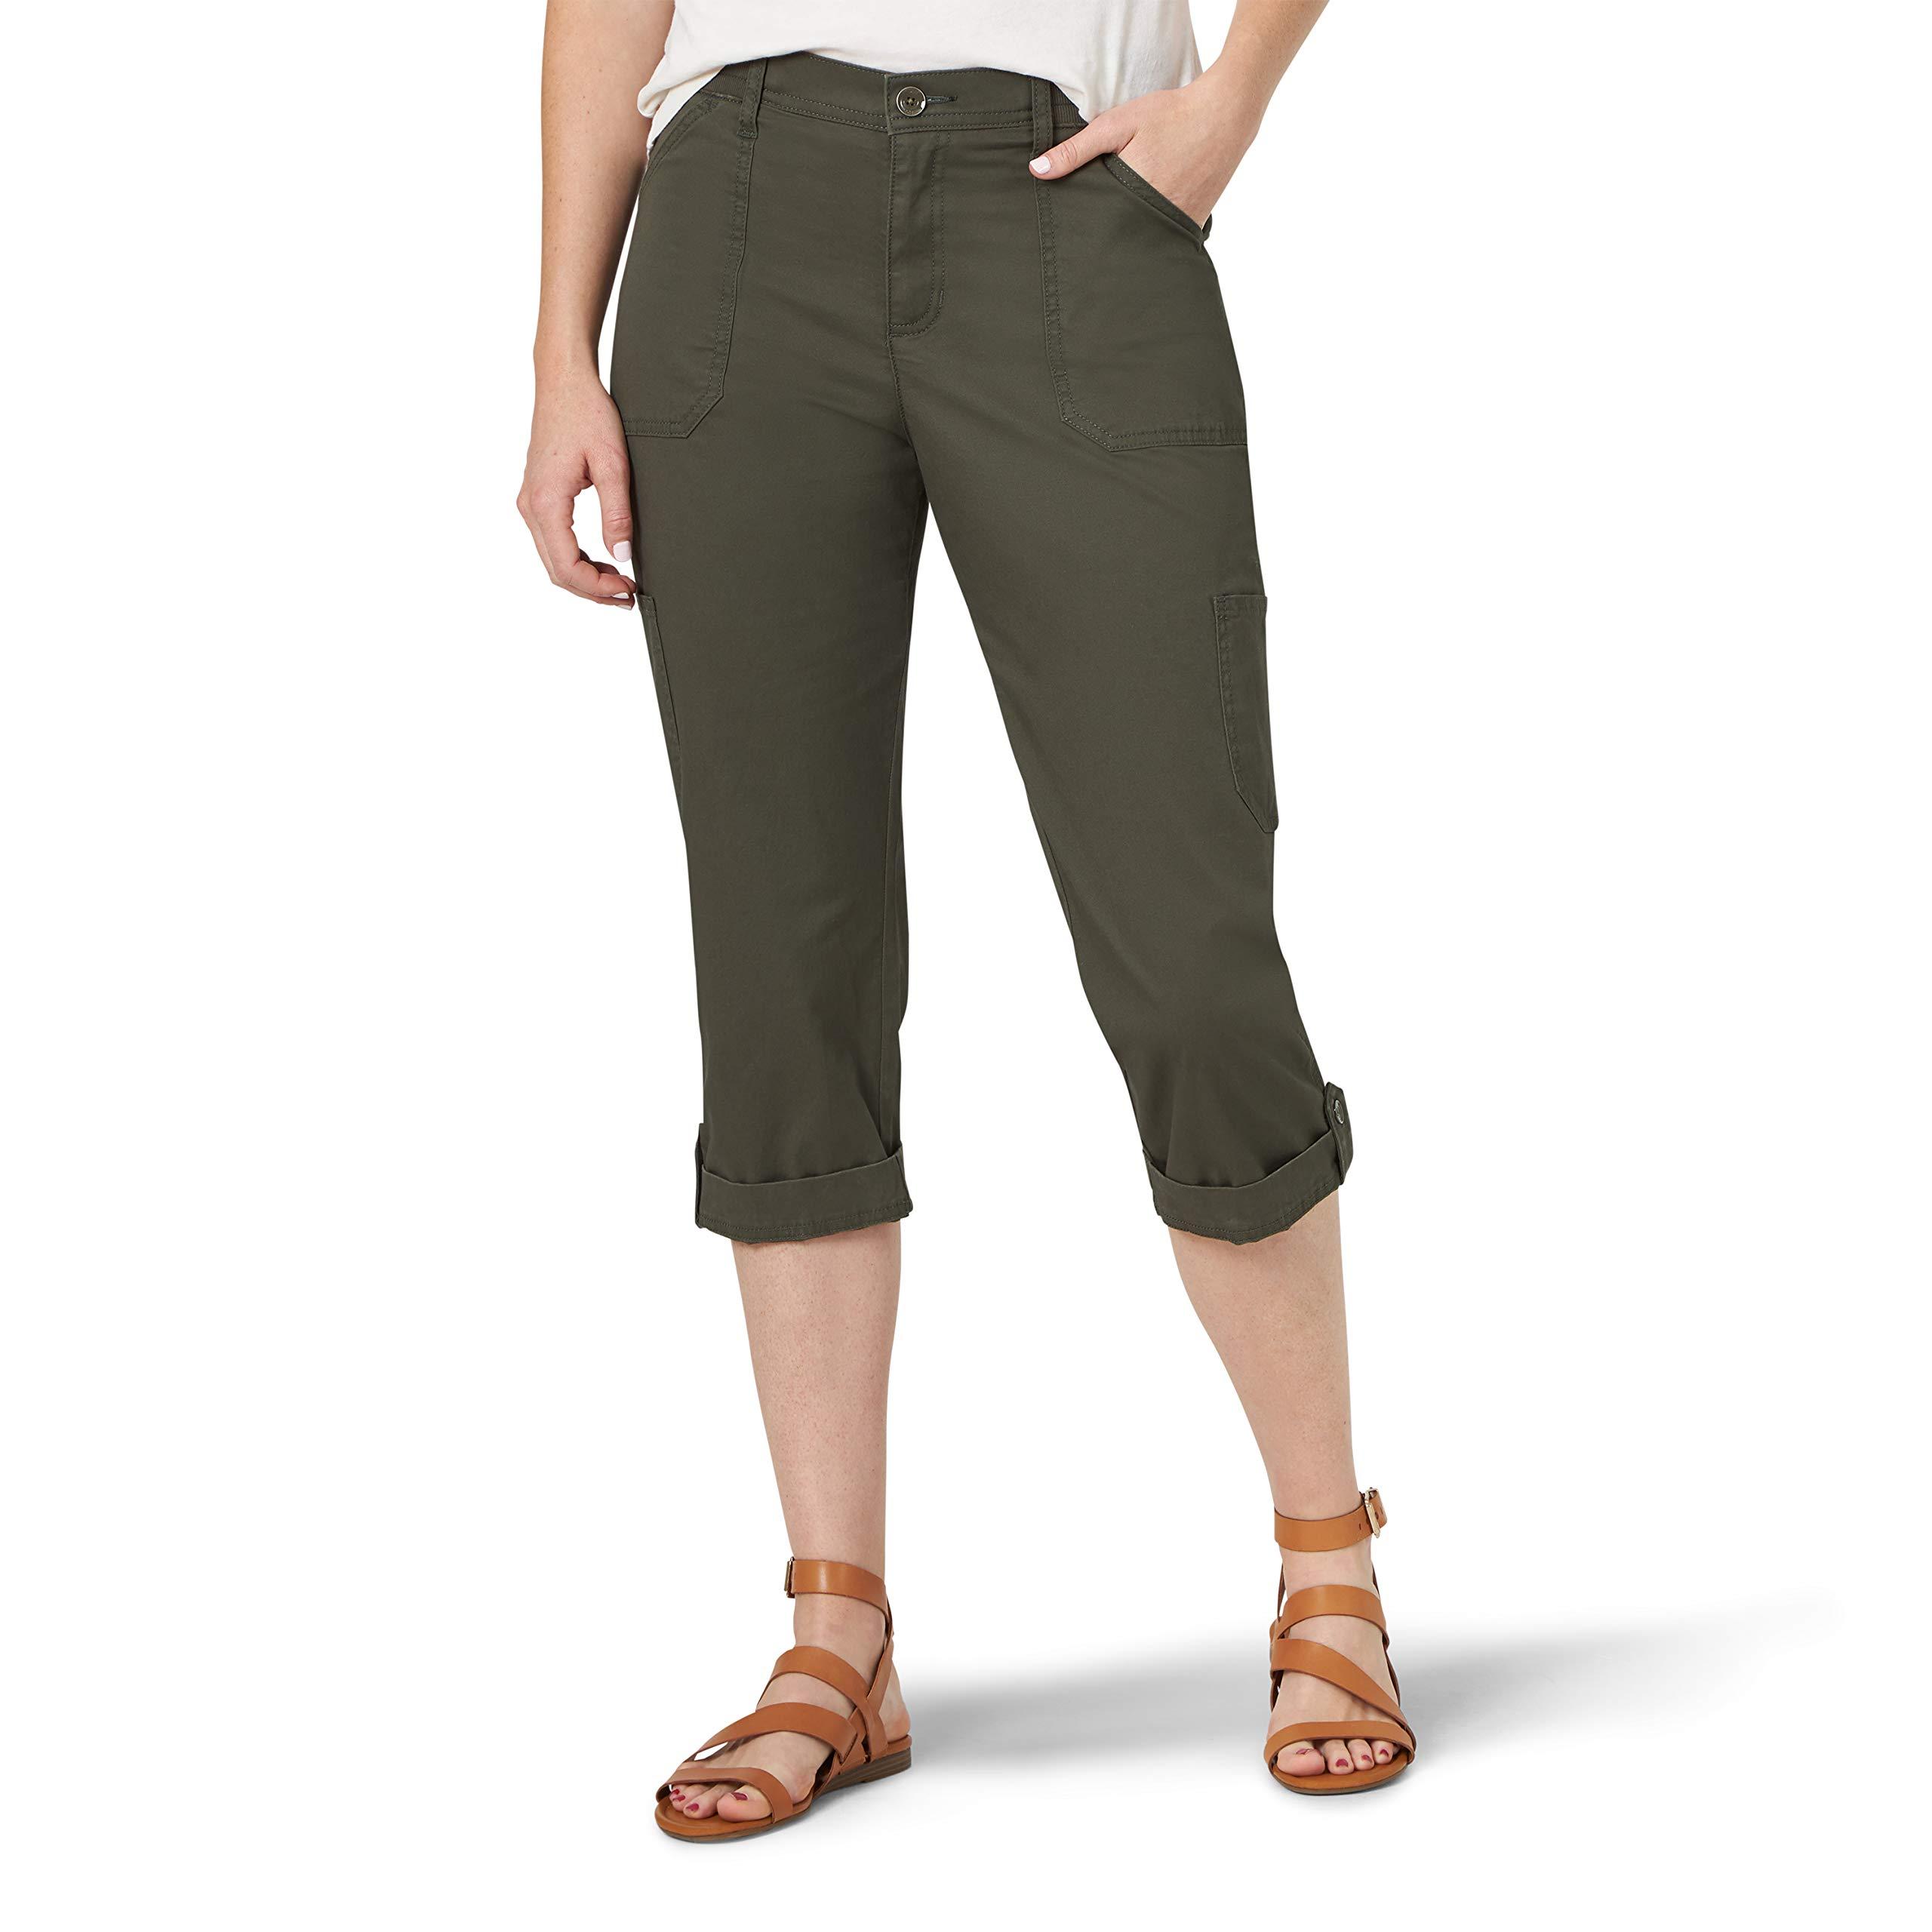 Lee Jeans Flex-to-go Cargo Capri Pant in Moss (Black) - Save 43% - Lyst